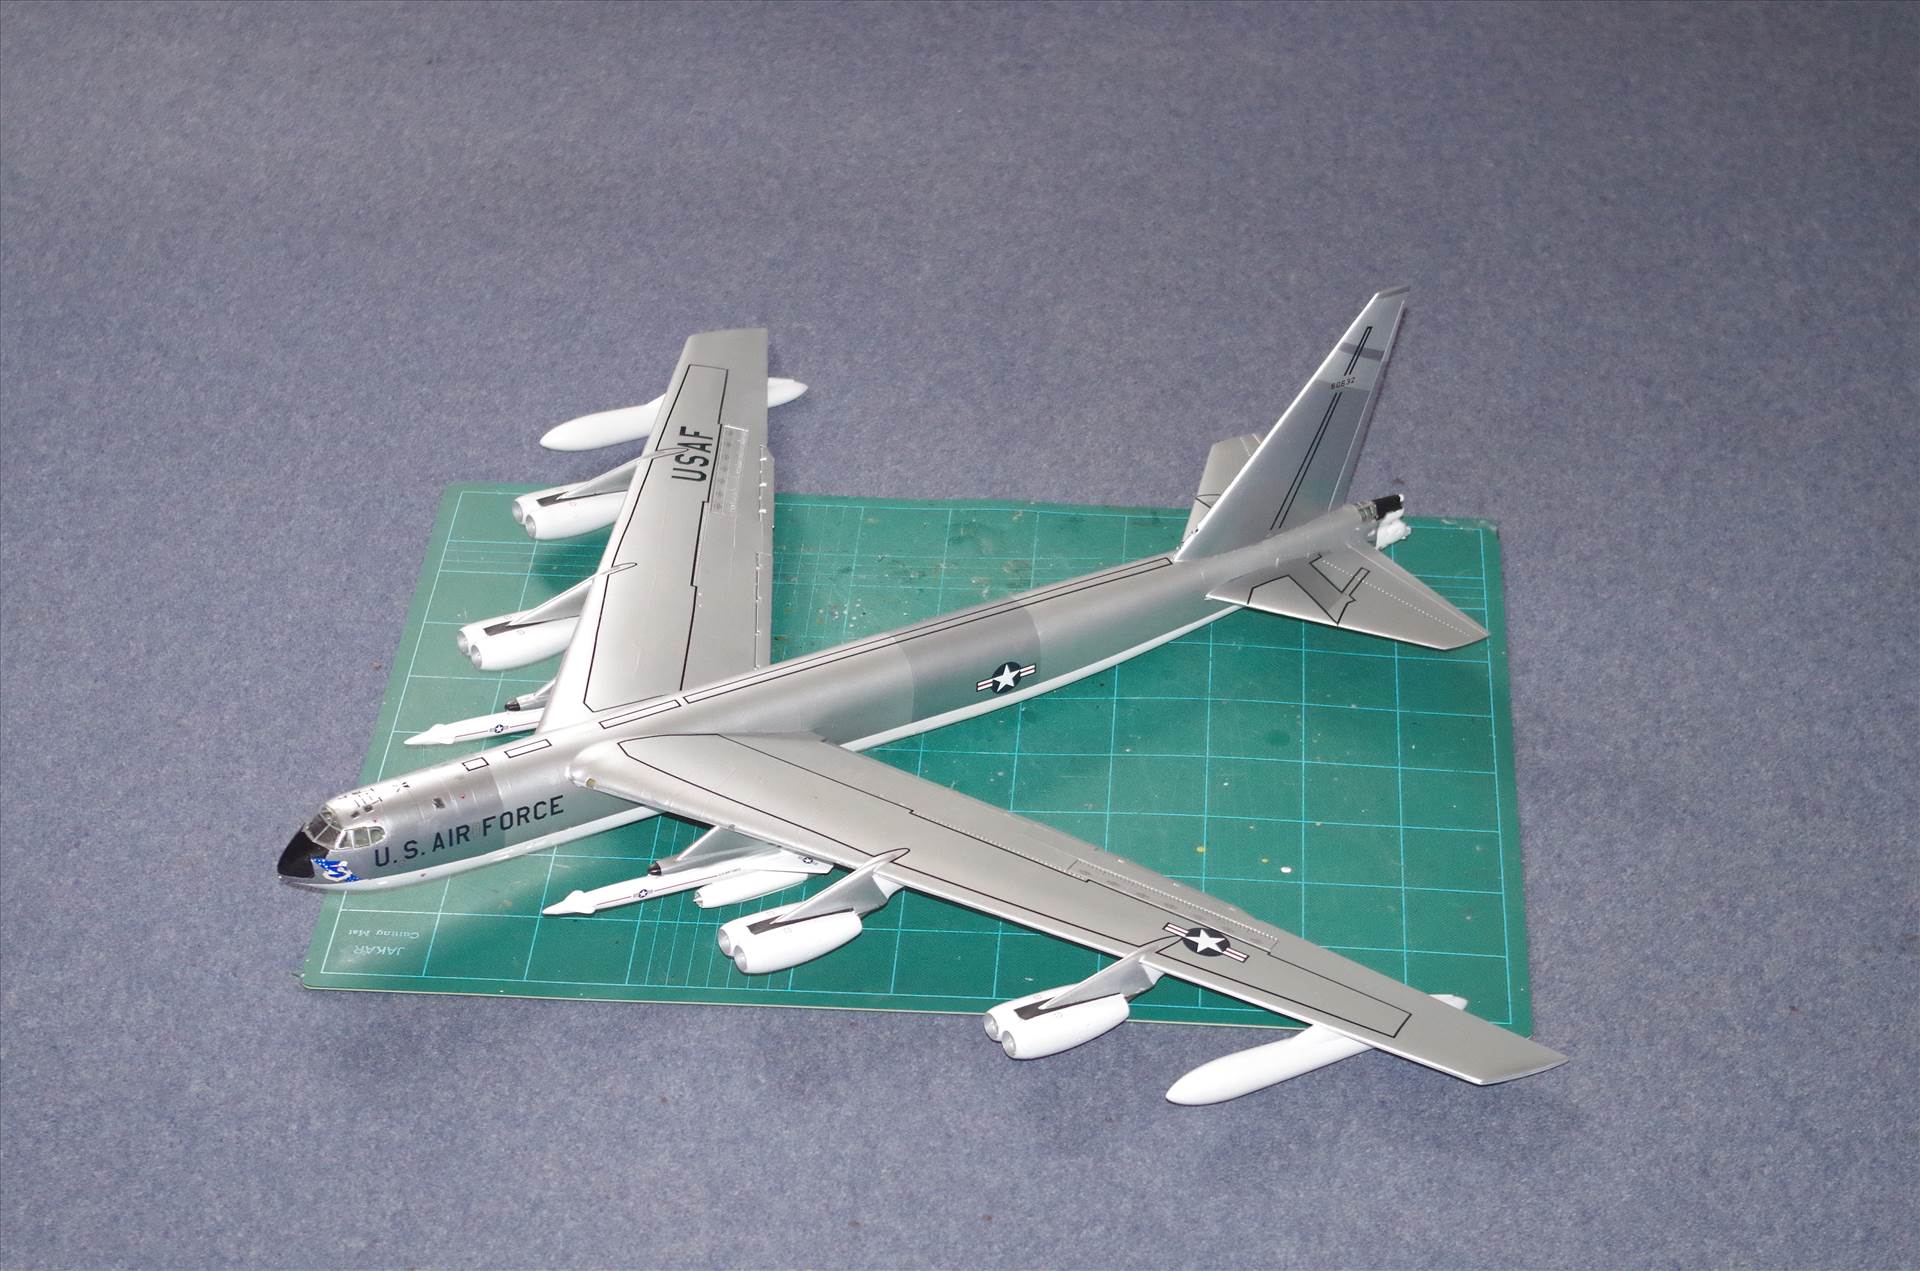 Italeri 1442 US Air Force Boeing B-52H Stratofortress 1/72 Scale Model Kit 